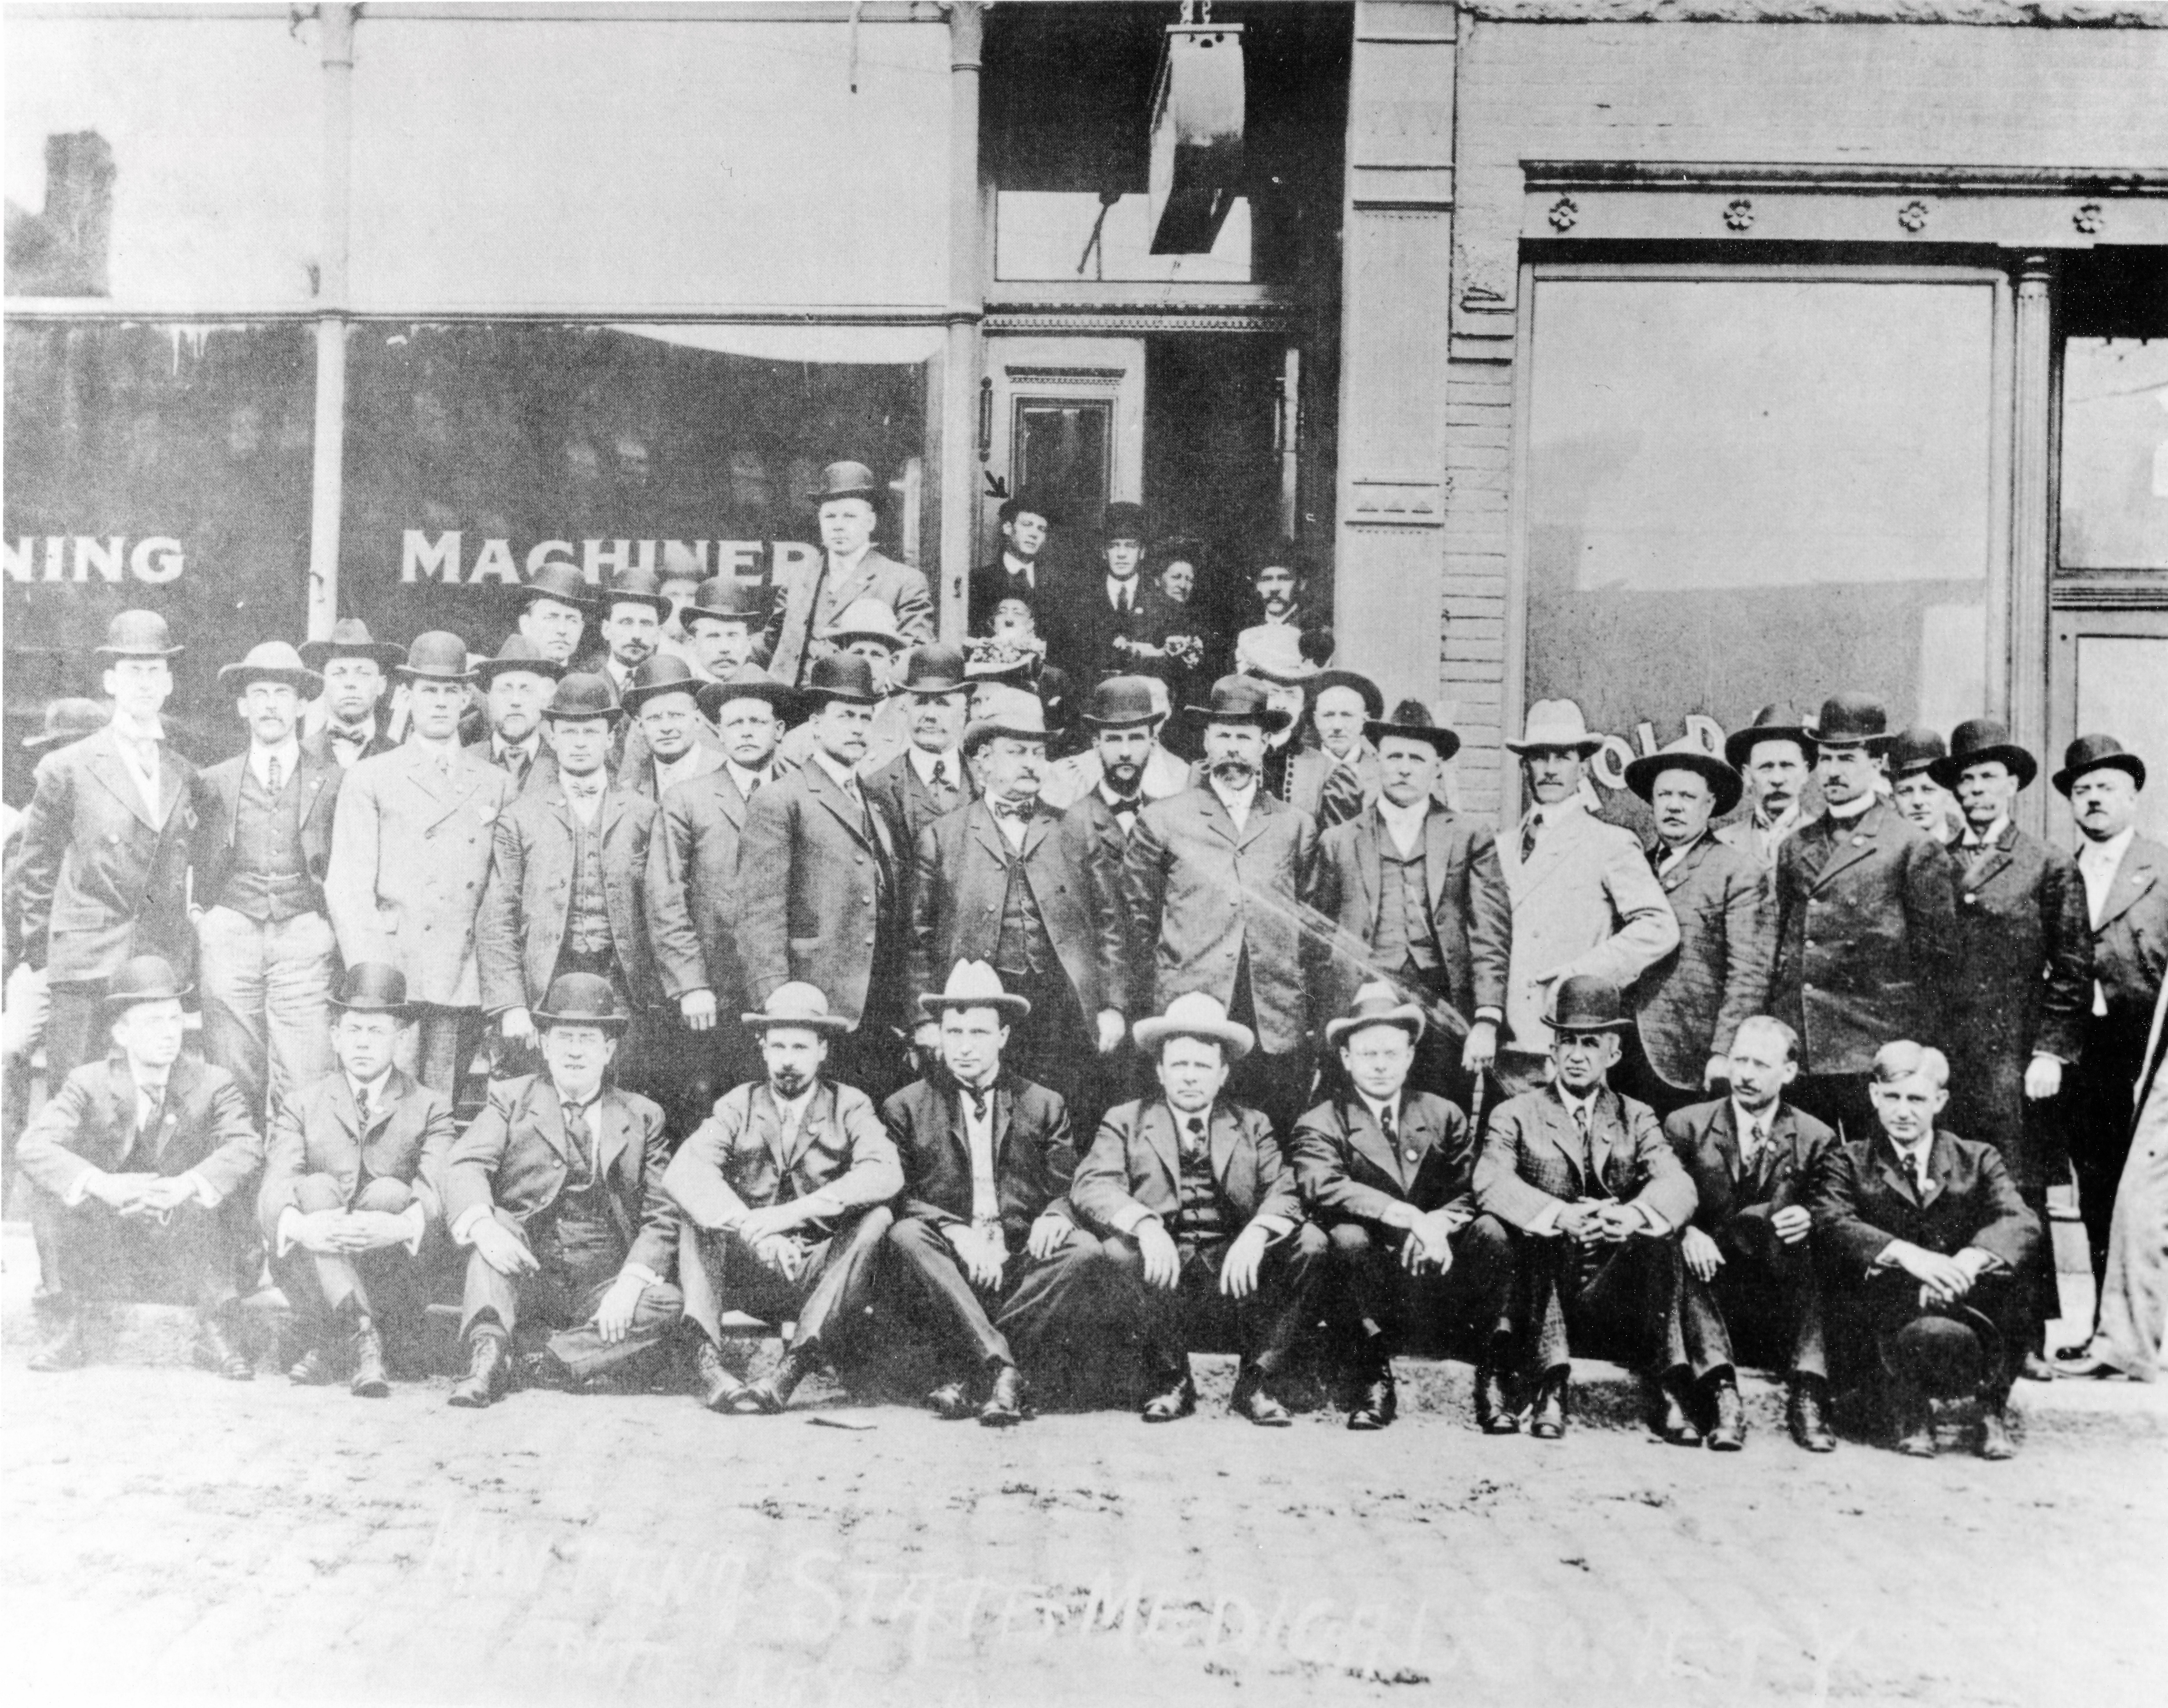 Several rows of men in bowlers pose on cobblestone street in front of a machinery shop. Rickets stands in the doorway at the back.